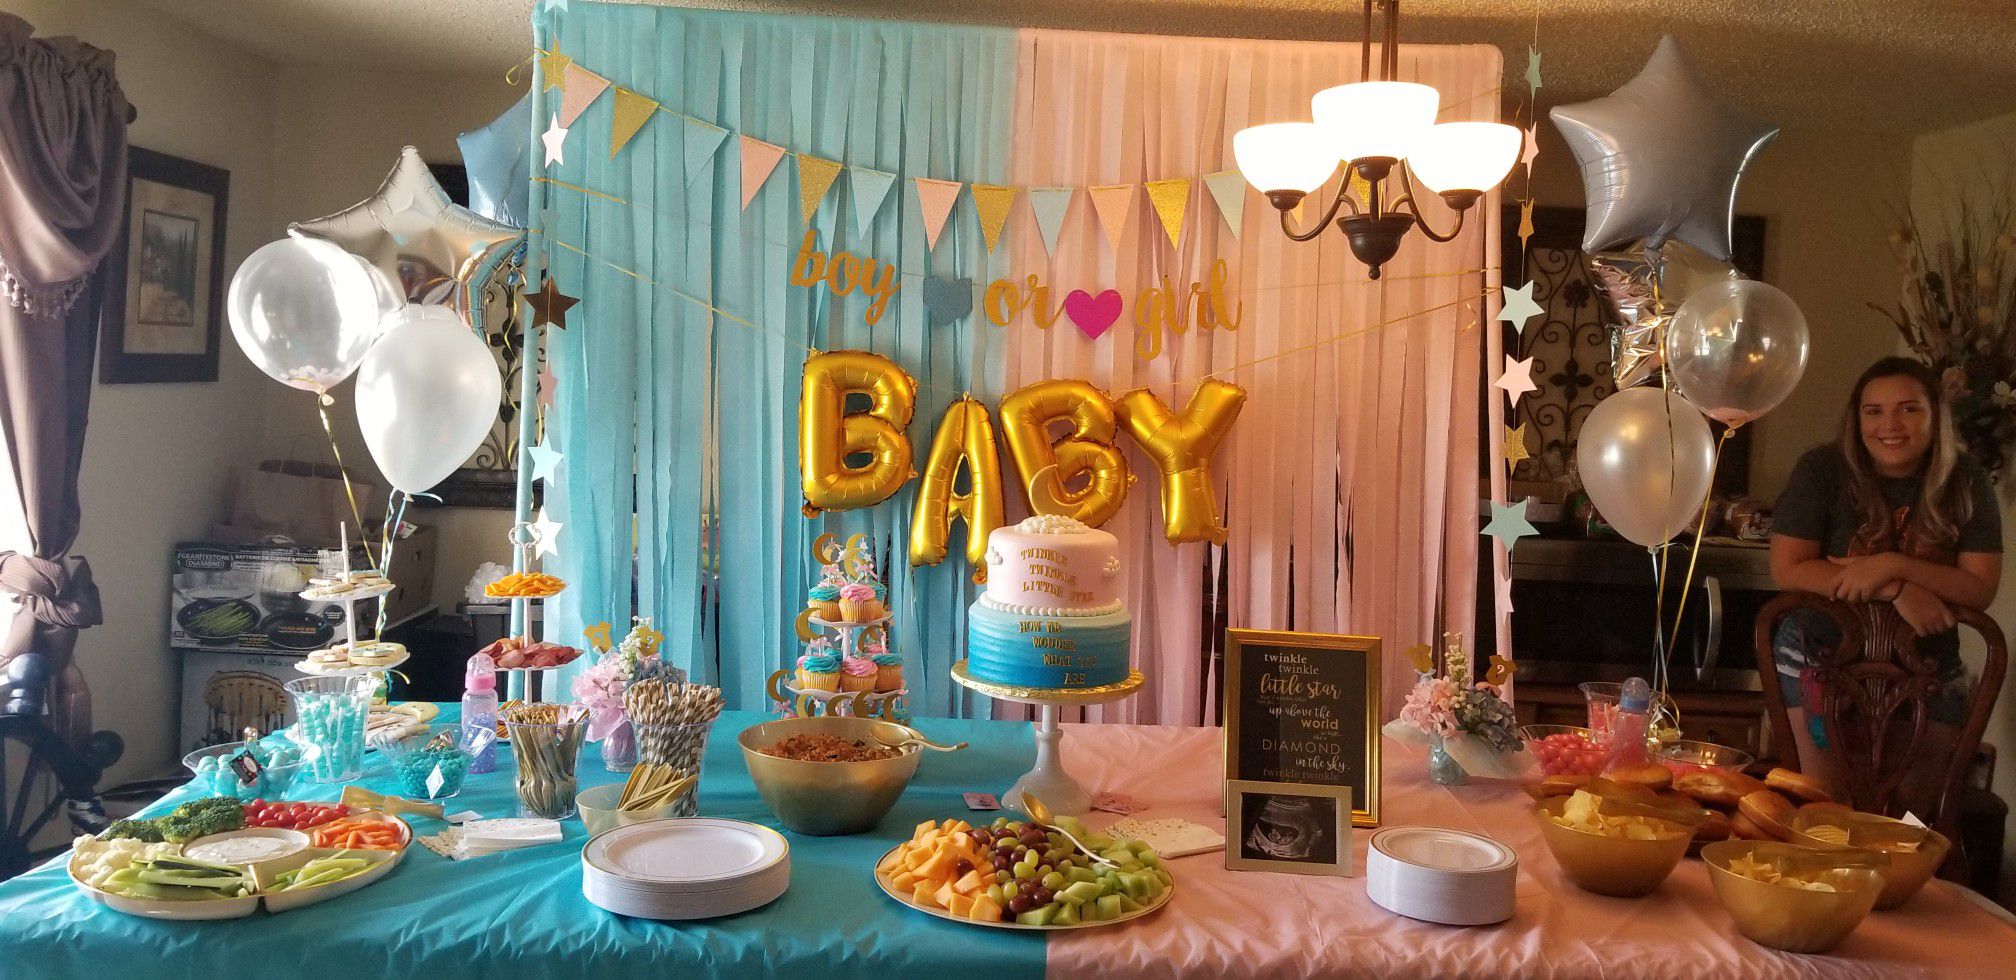 Gender Reveal Party Supplies and Centerpieces